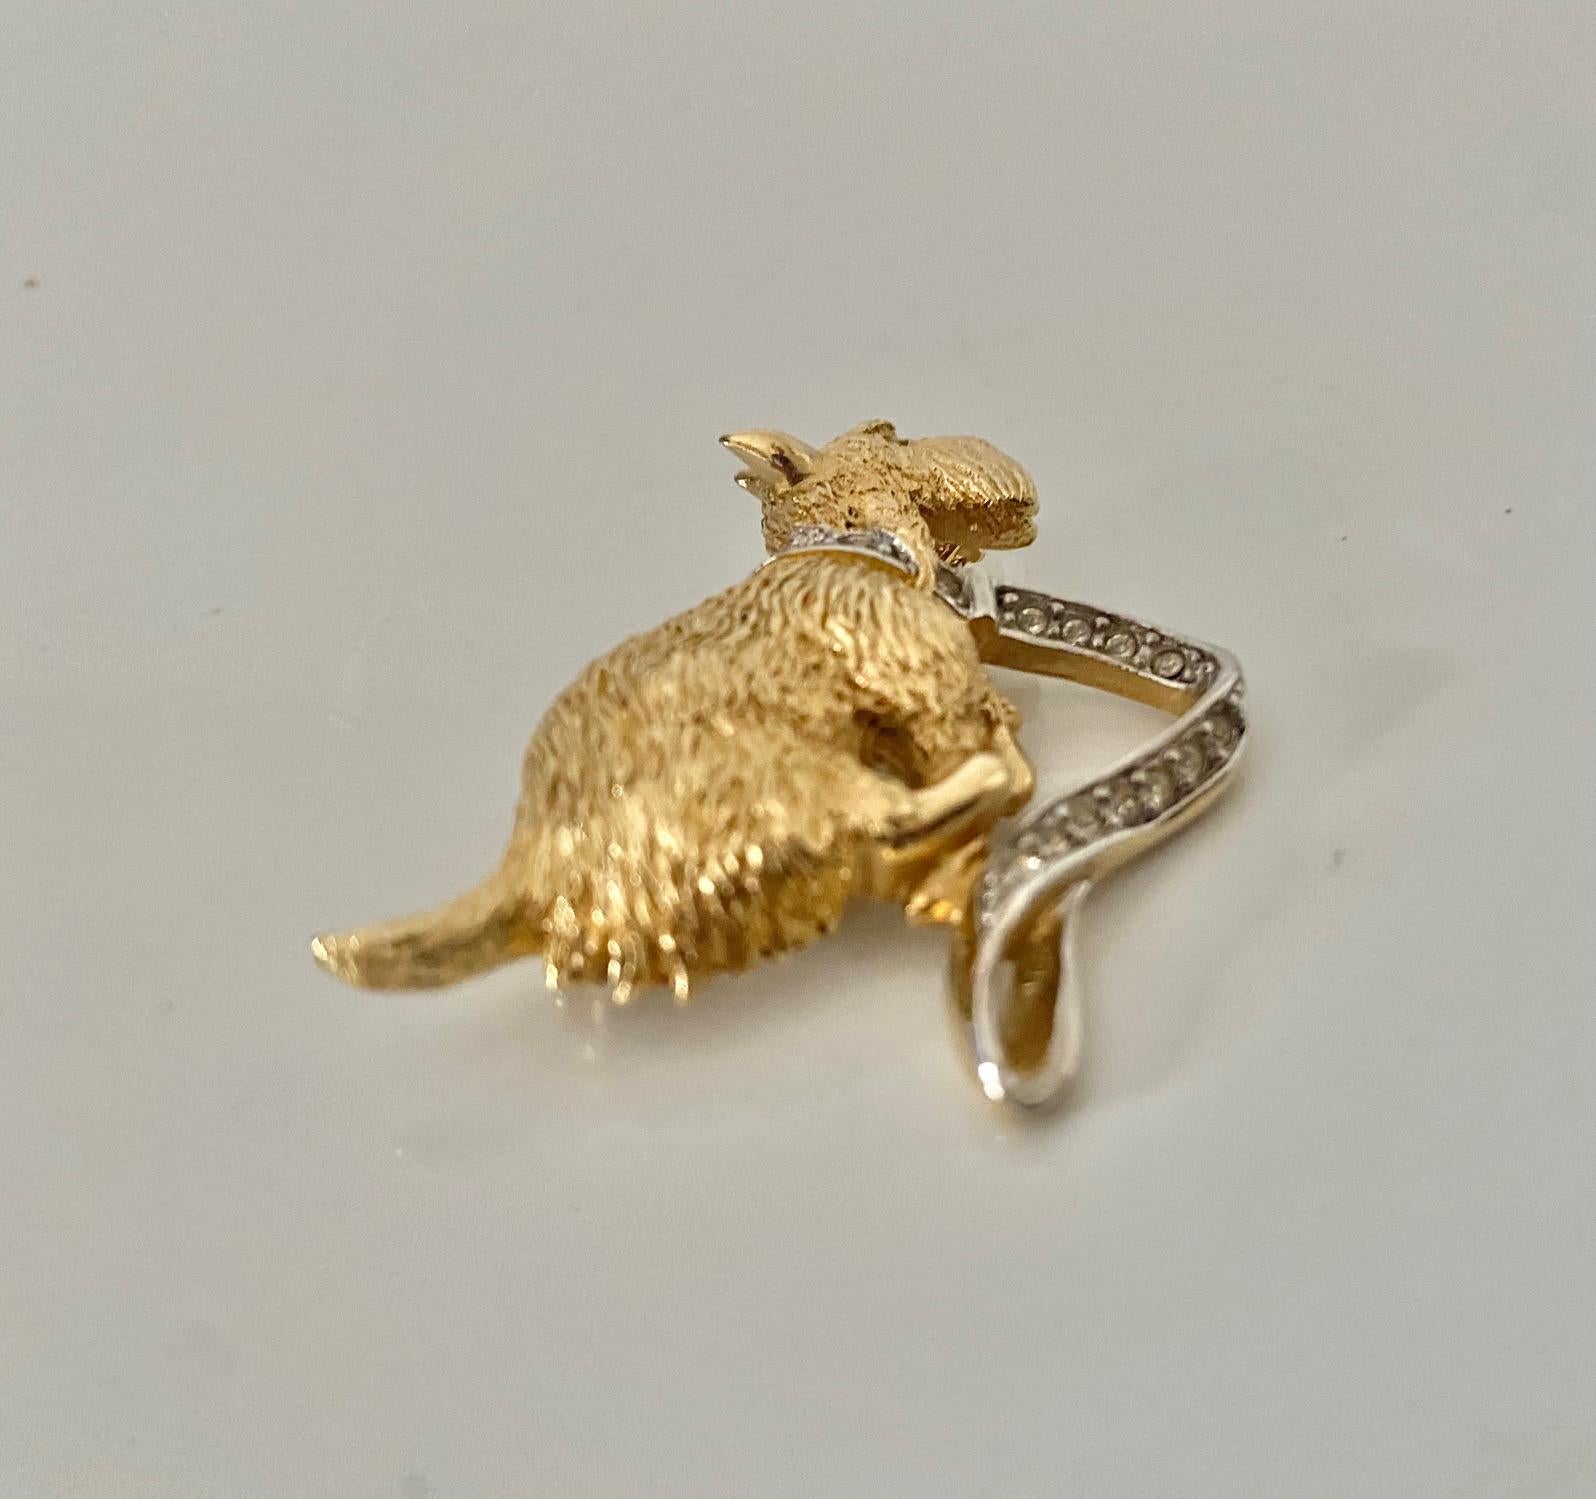 Bead 1980s Burberrys Terrier Dog Gold Plated Brooch For Sale